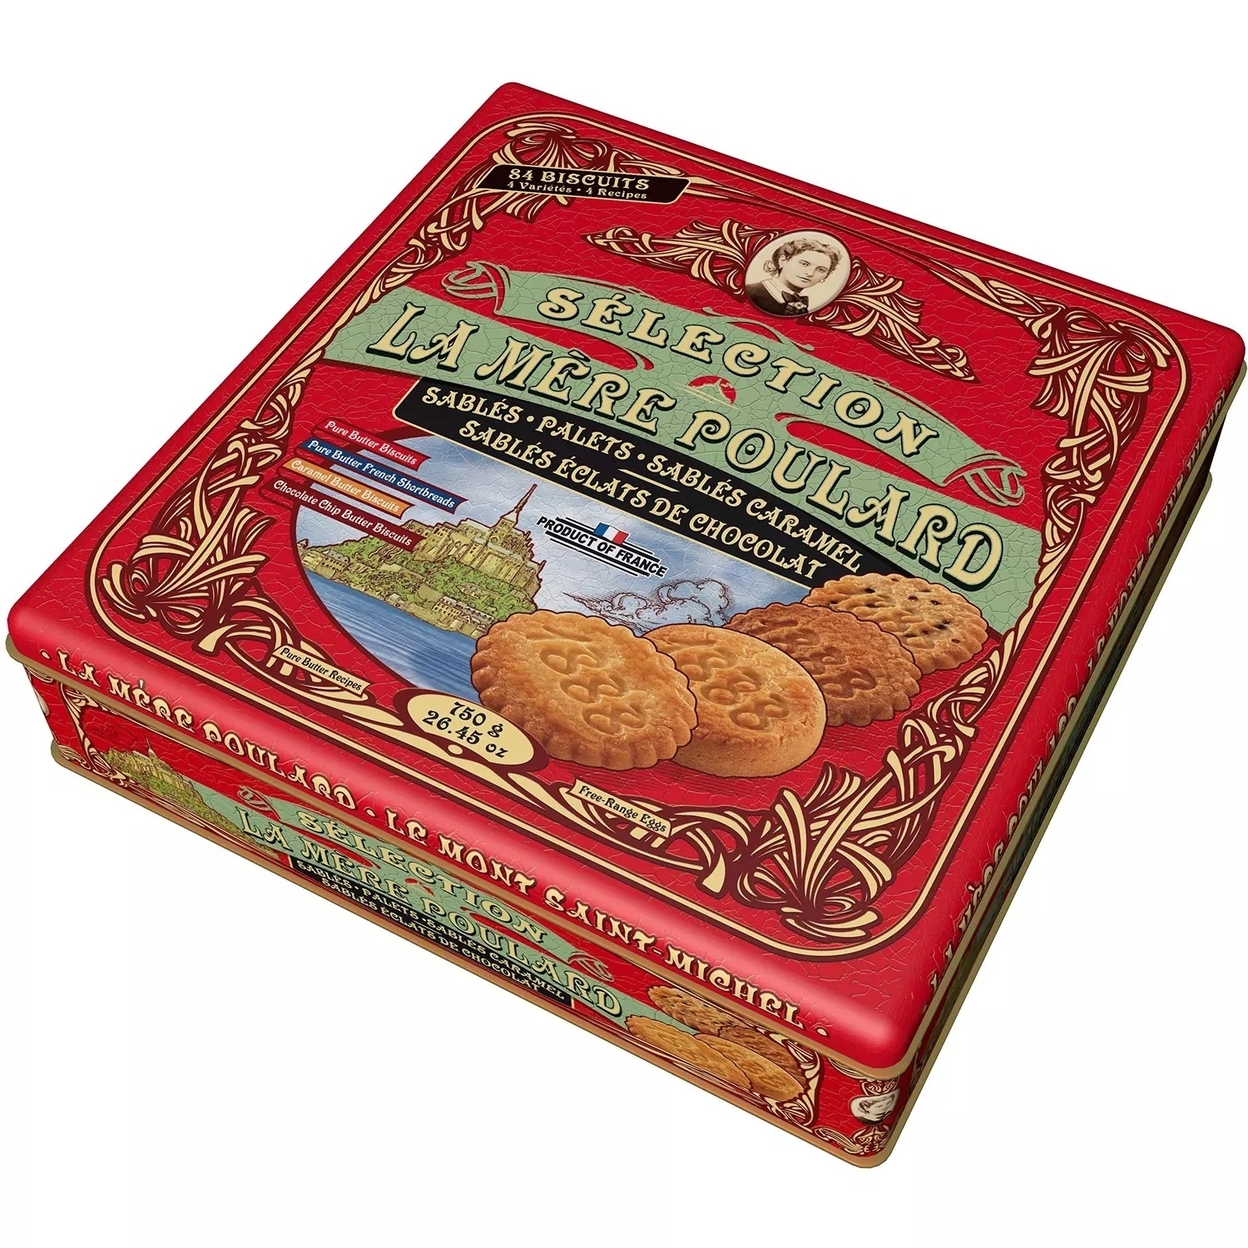 La Mere Poulard French Butter Cookies (1.65 Pounds)